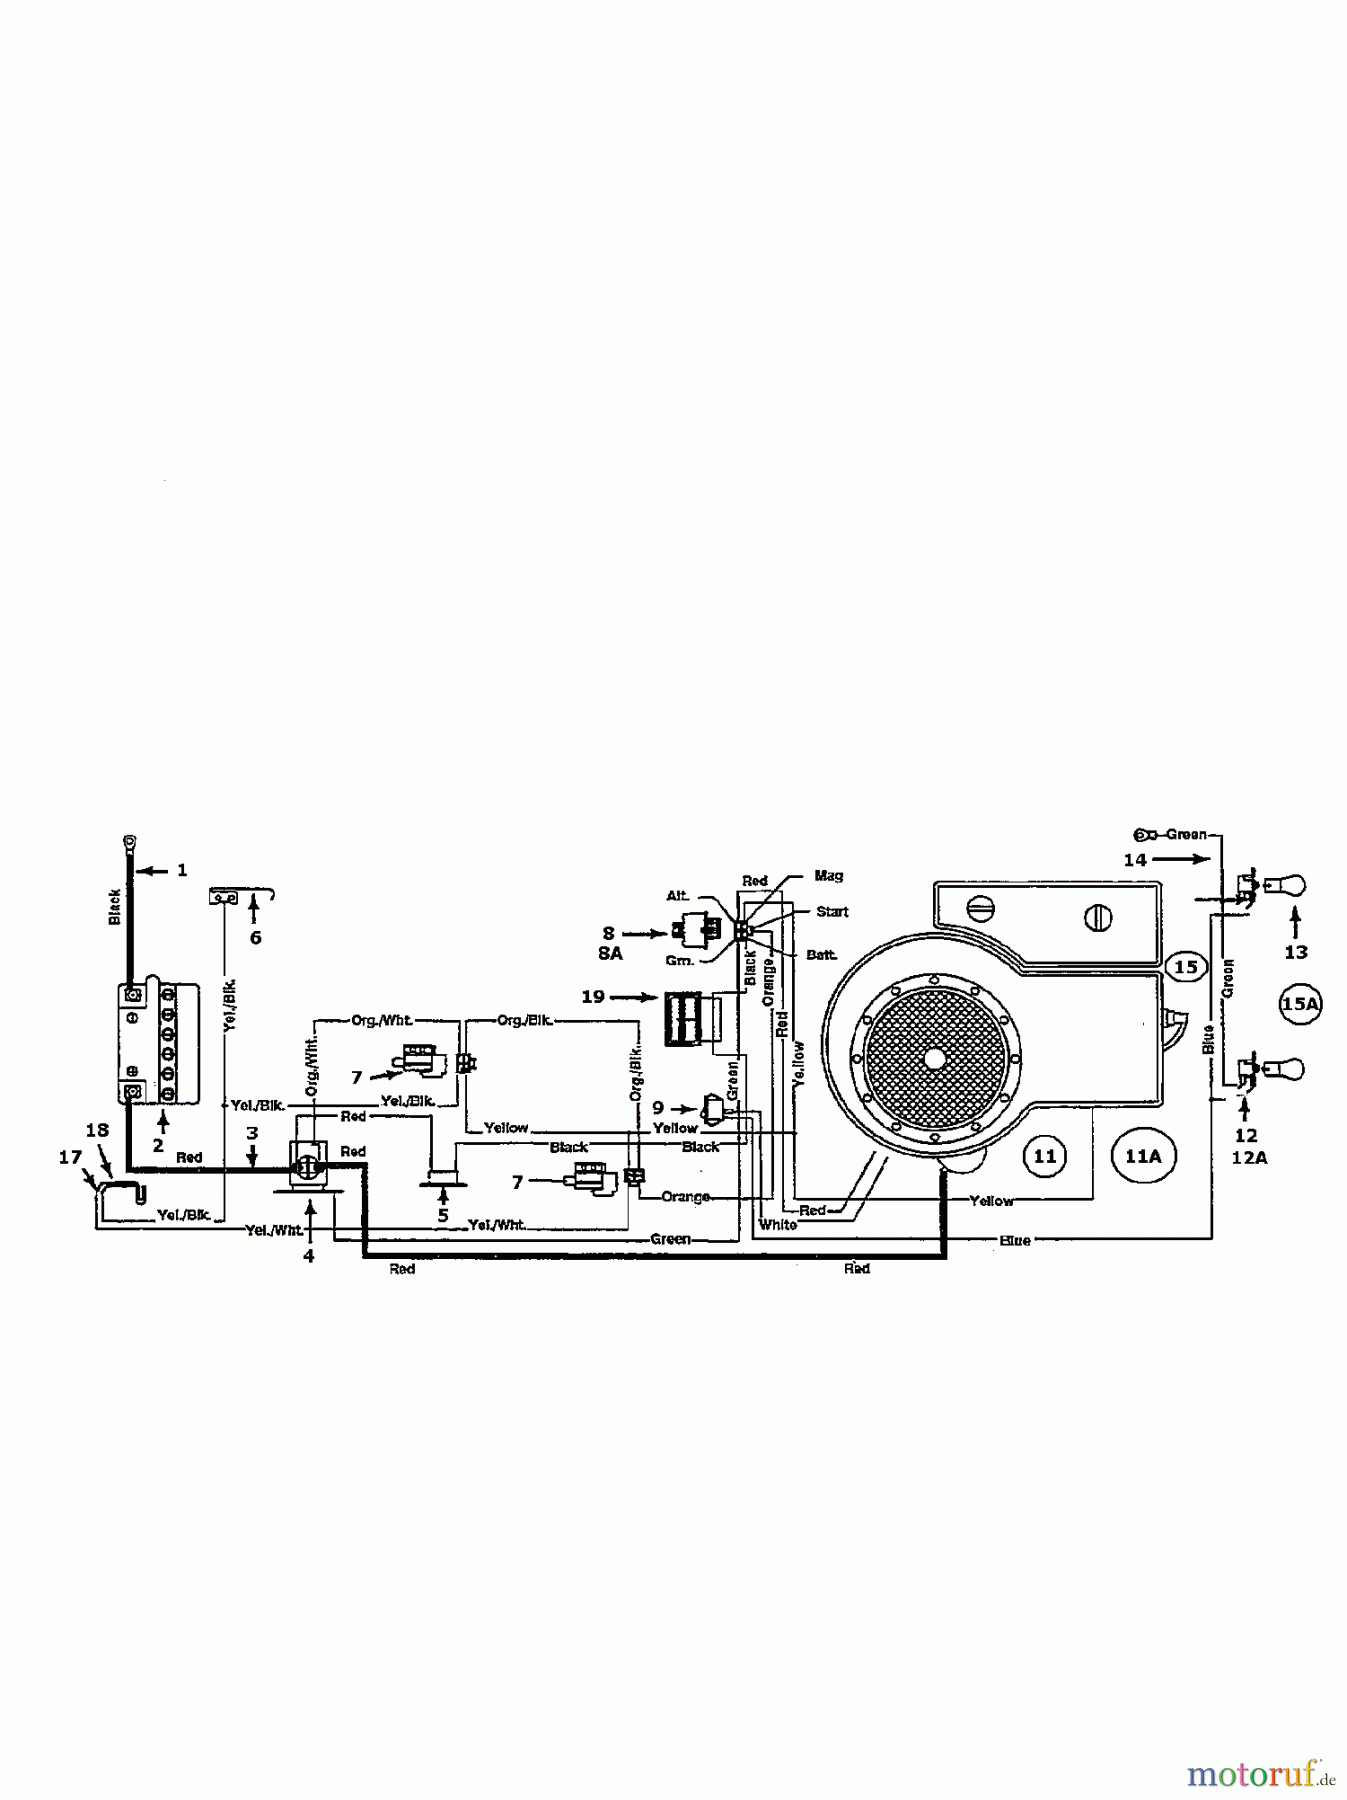  Columbia Lawn tractors 112/910 135H451E626  (1995) Wiring diagram single cylinder